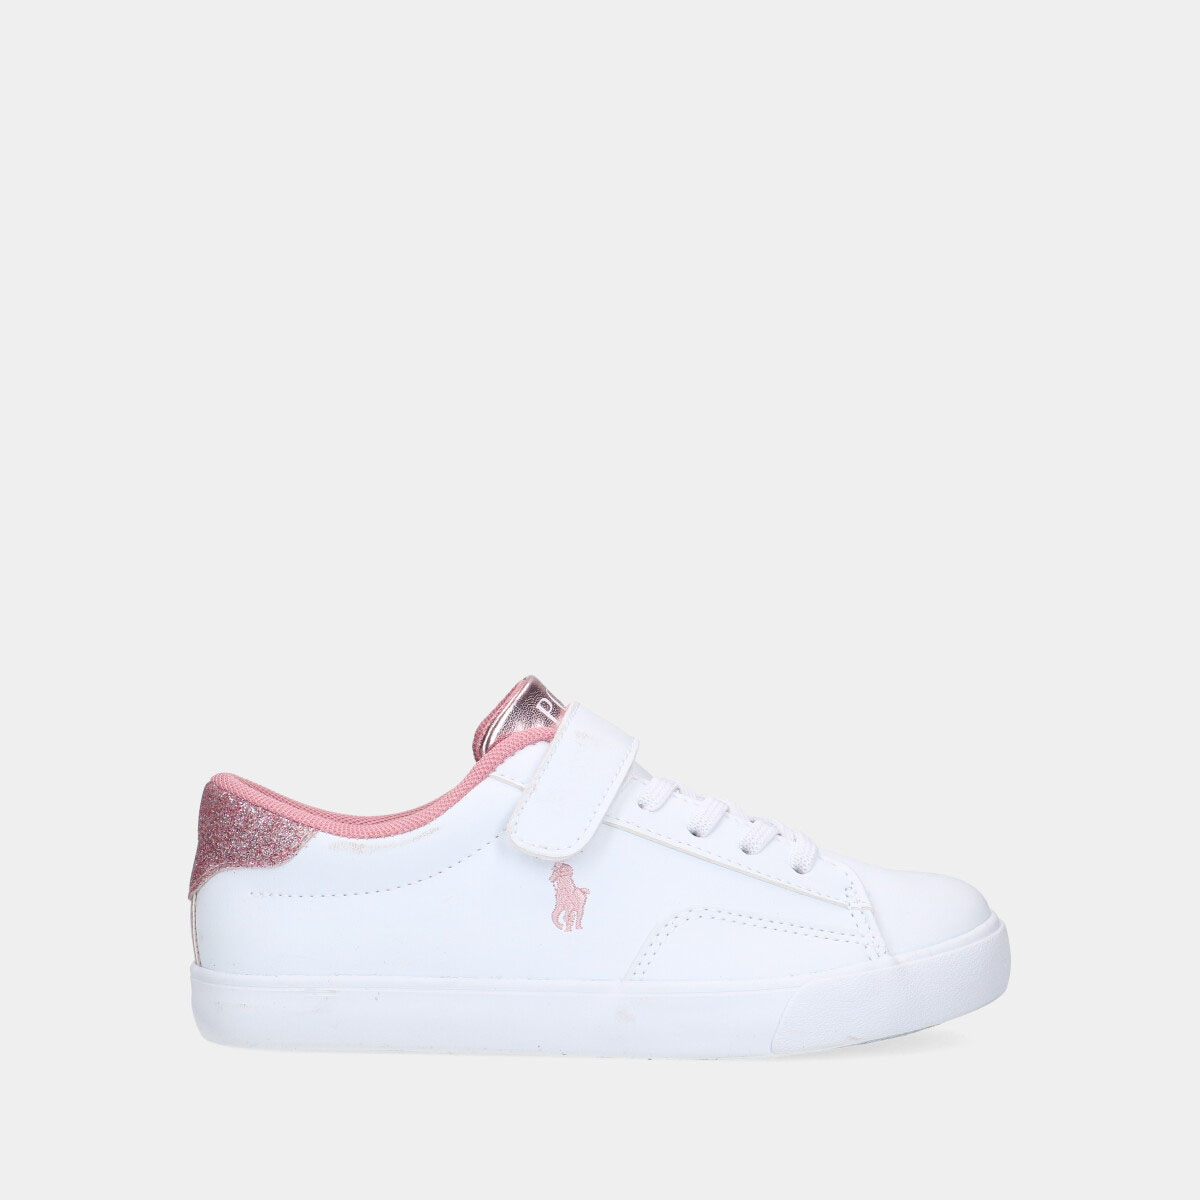 Polo Ralph Lauren Theron V PS White - Pink kleuter sneakers